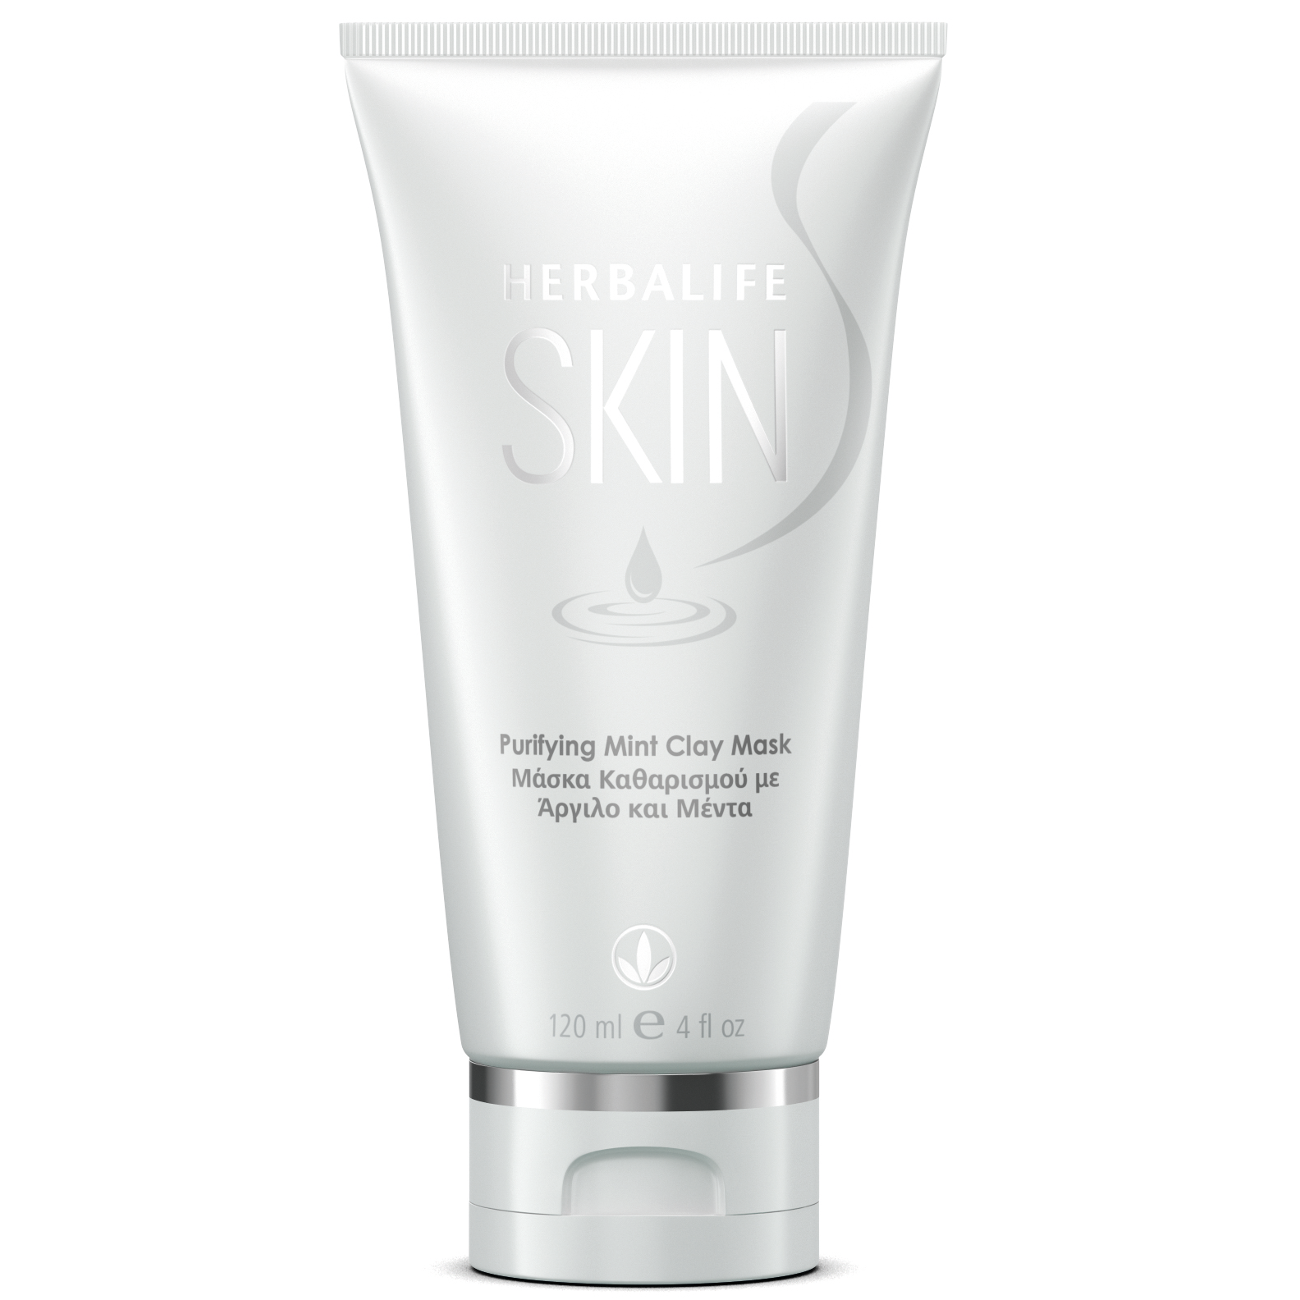 Herbalife SKIN Purifying Mint Clay Mask  product shot